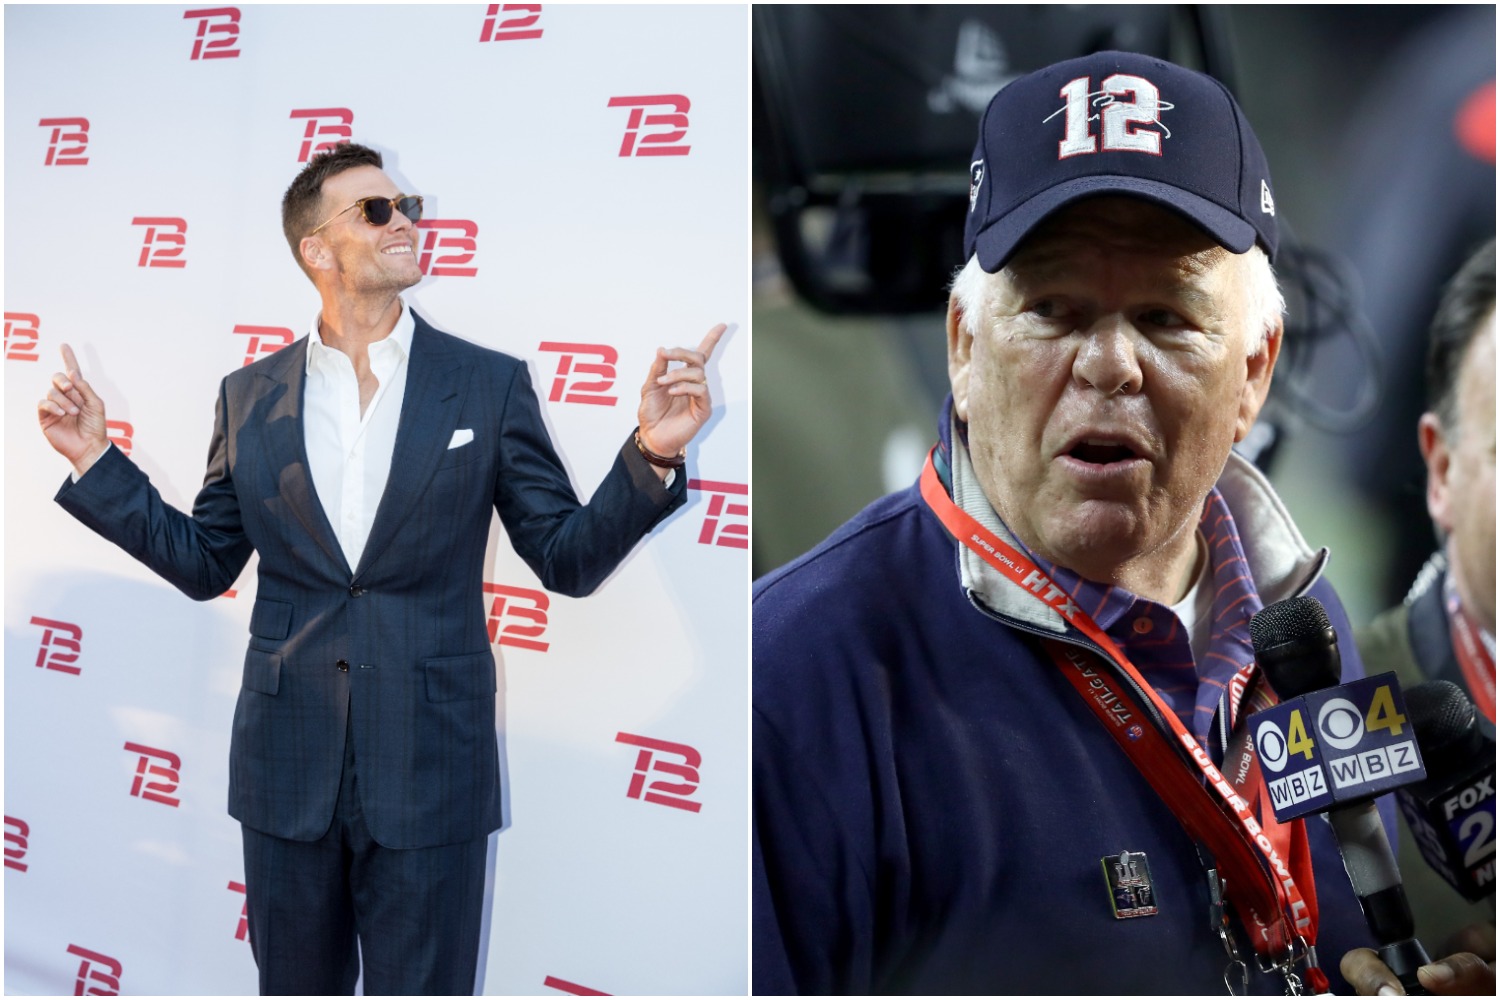 Although he admitted his legendary son takes 45 pills a day, Tom Brady Sr. still has a major reason to worry about Tom Brady's health.